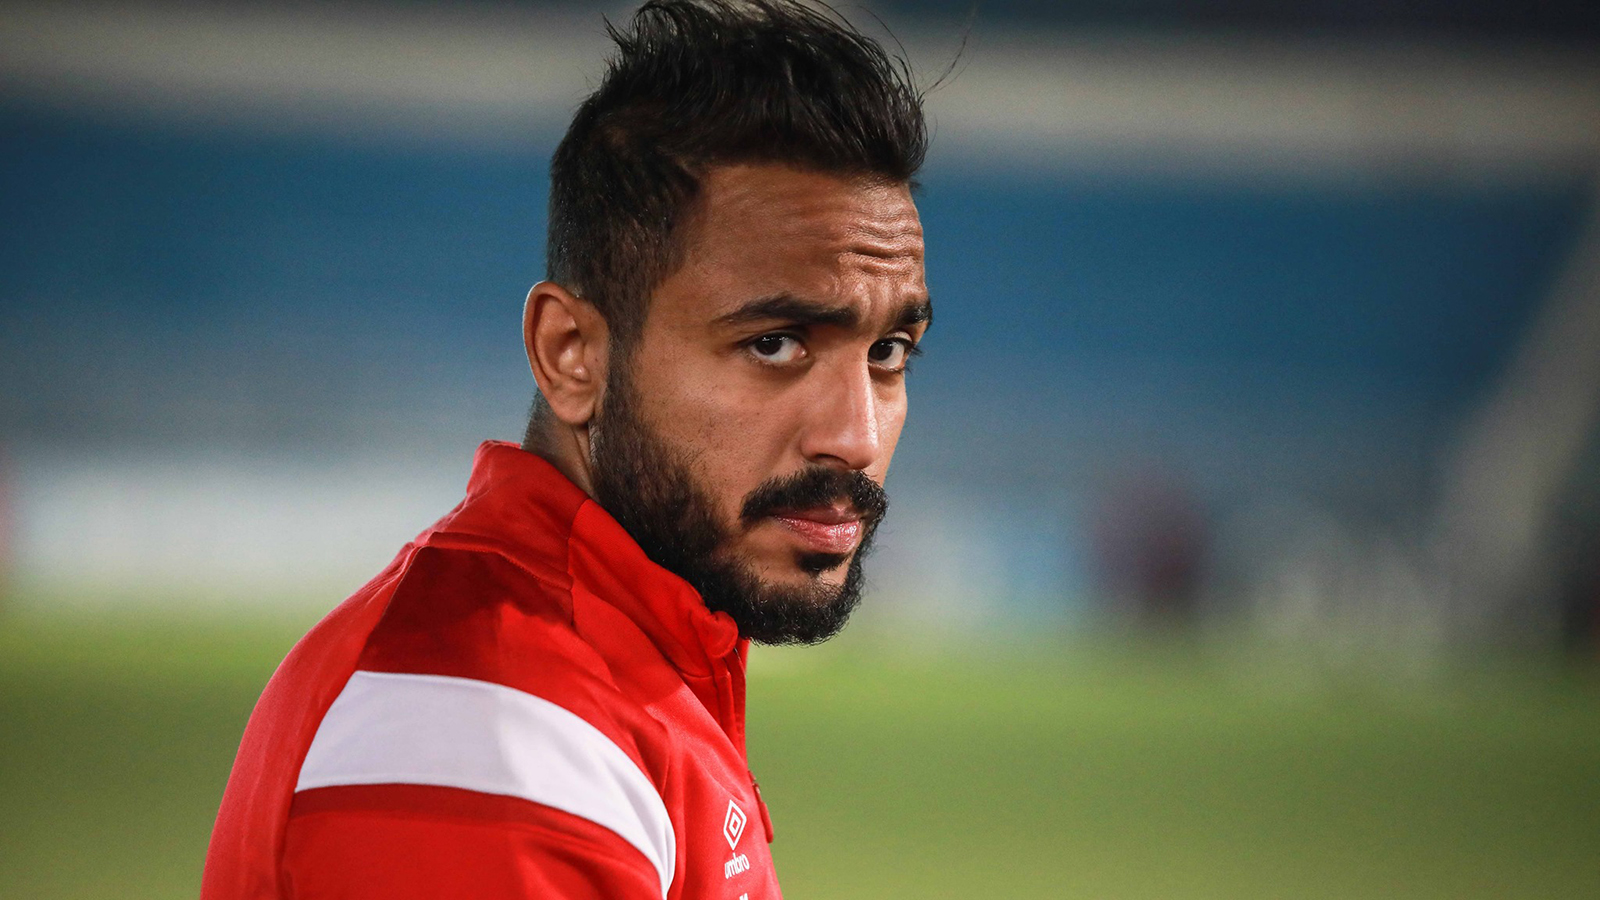 Al-Ahly submits an urgent memorandum to the Egyptian Federation regarding the penalty for stopping Kahraba